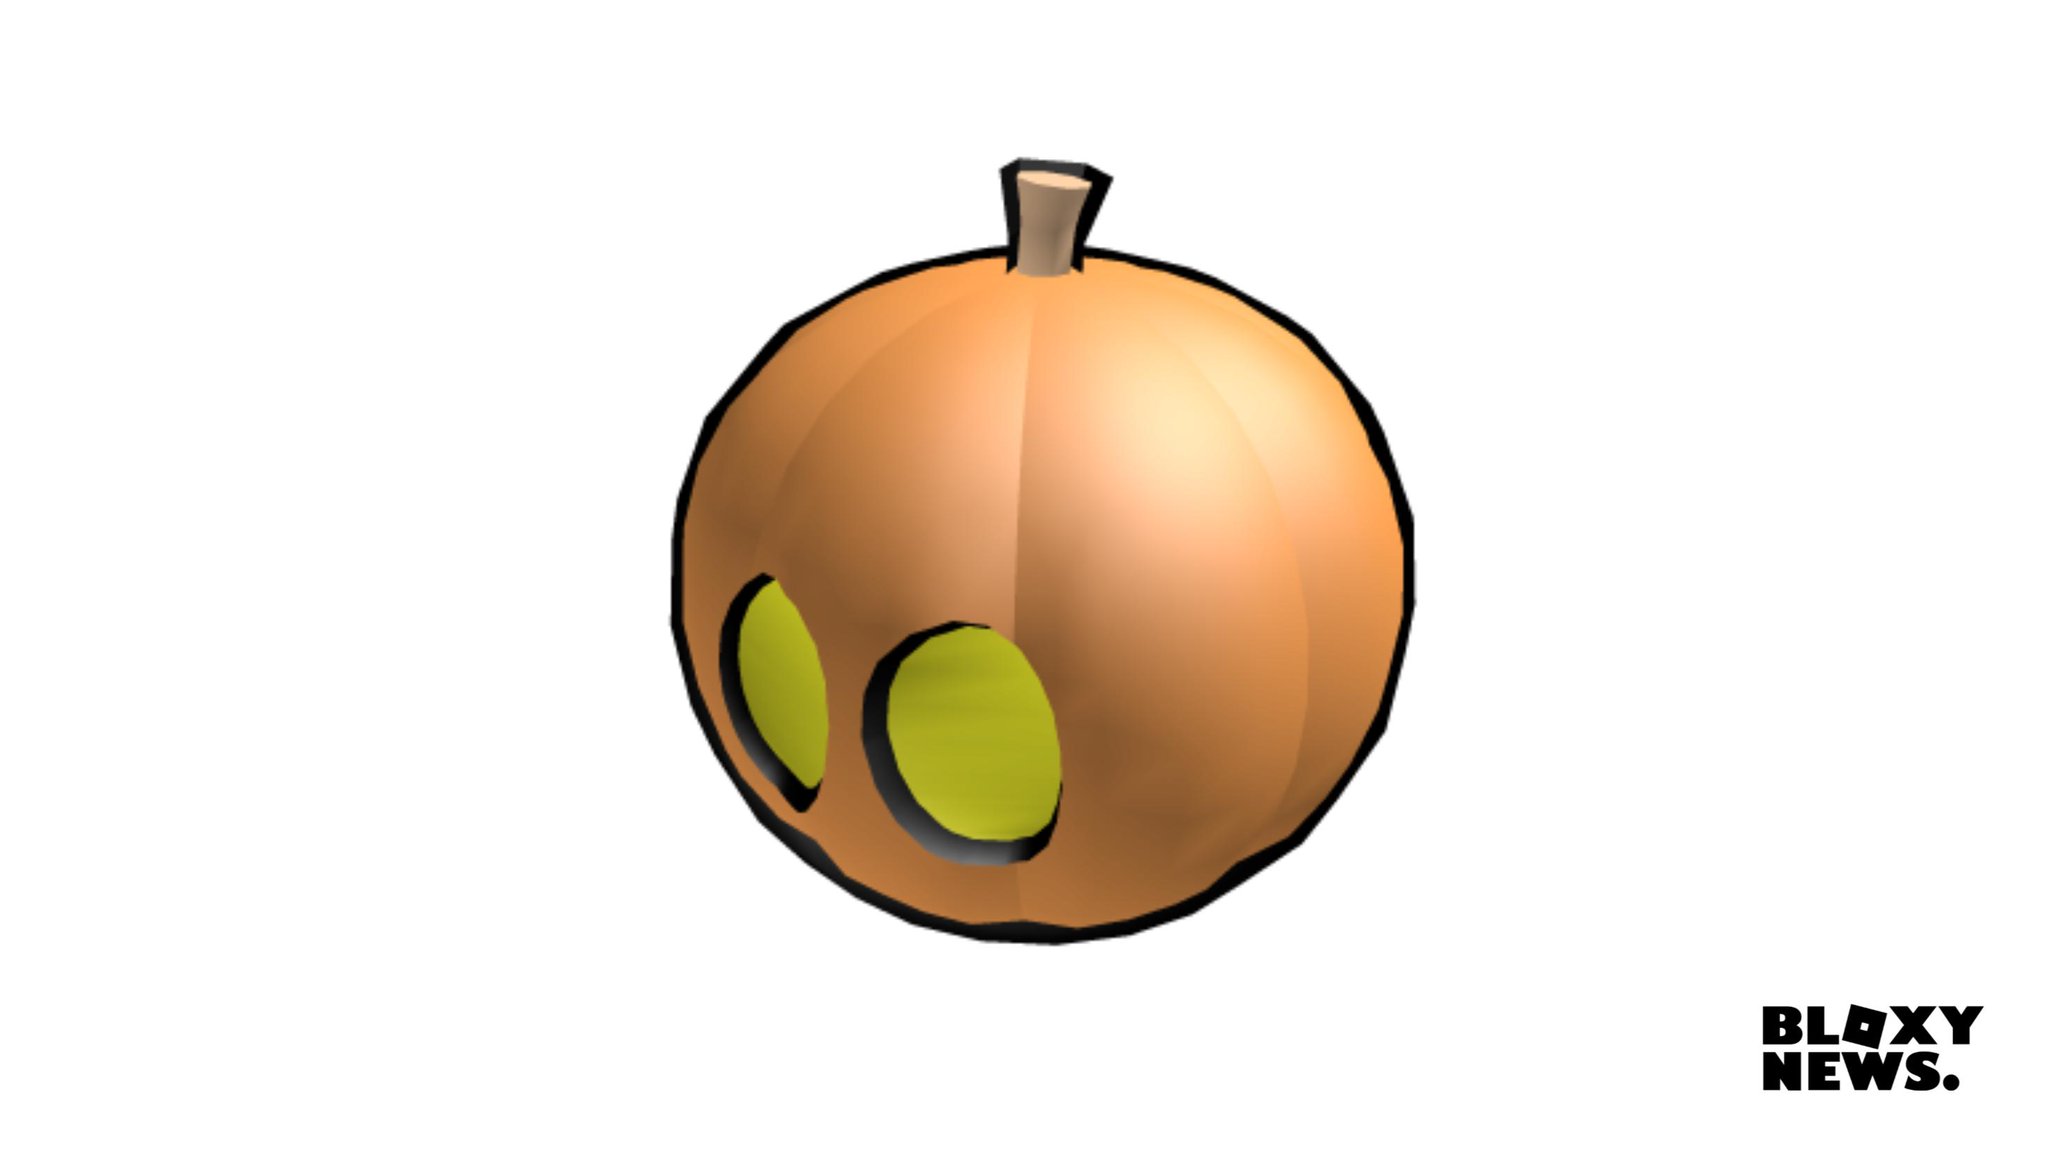 Bloxy News On Twitter He S A Witchery Student From Oddport Academy Pumpkin Kid By Maplestick1 Is Now The 1 Bestselling Ugc User Generated Content Hat On Roblox Pick Him Up - roblox ducky hat